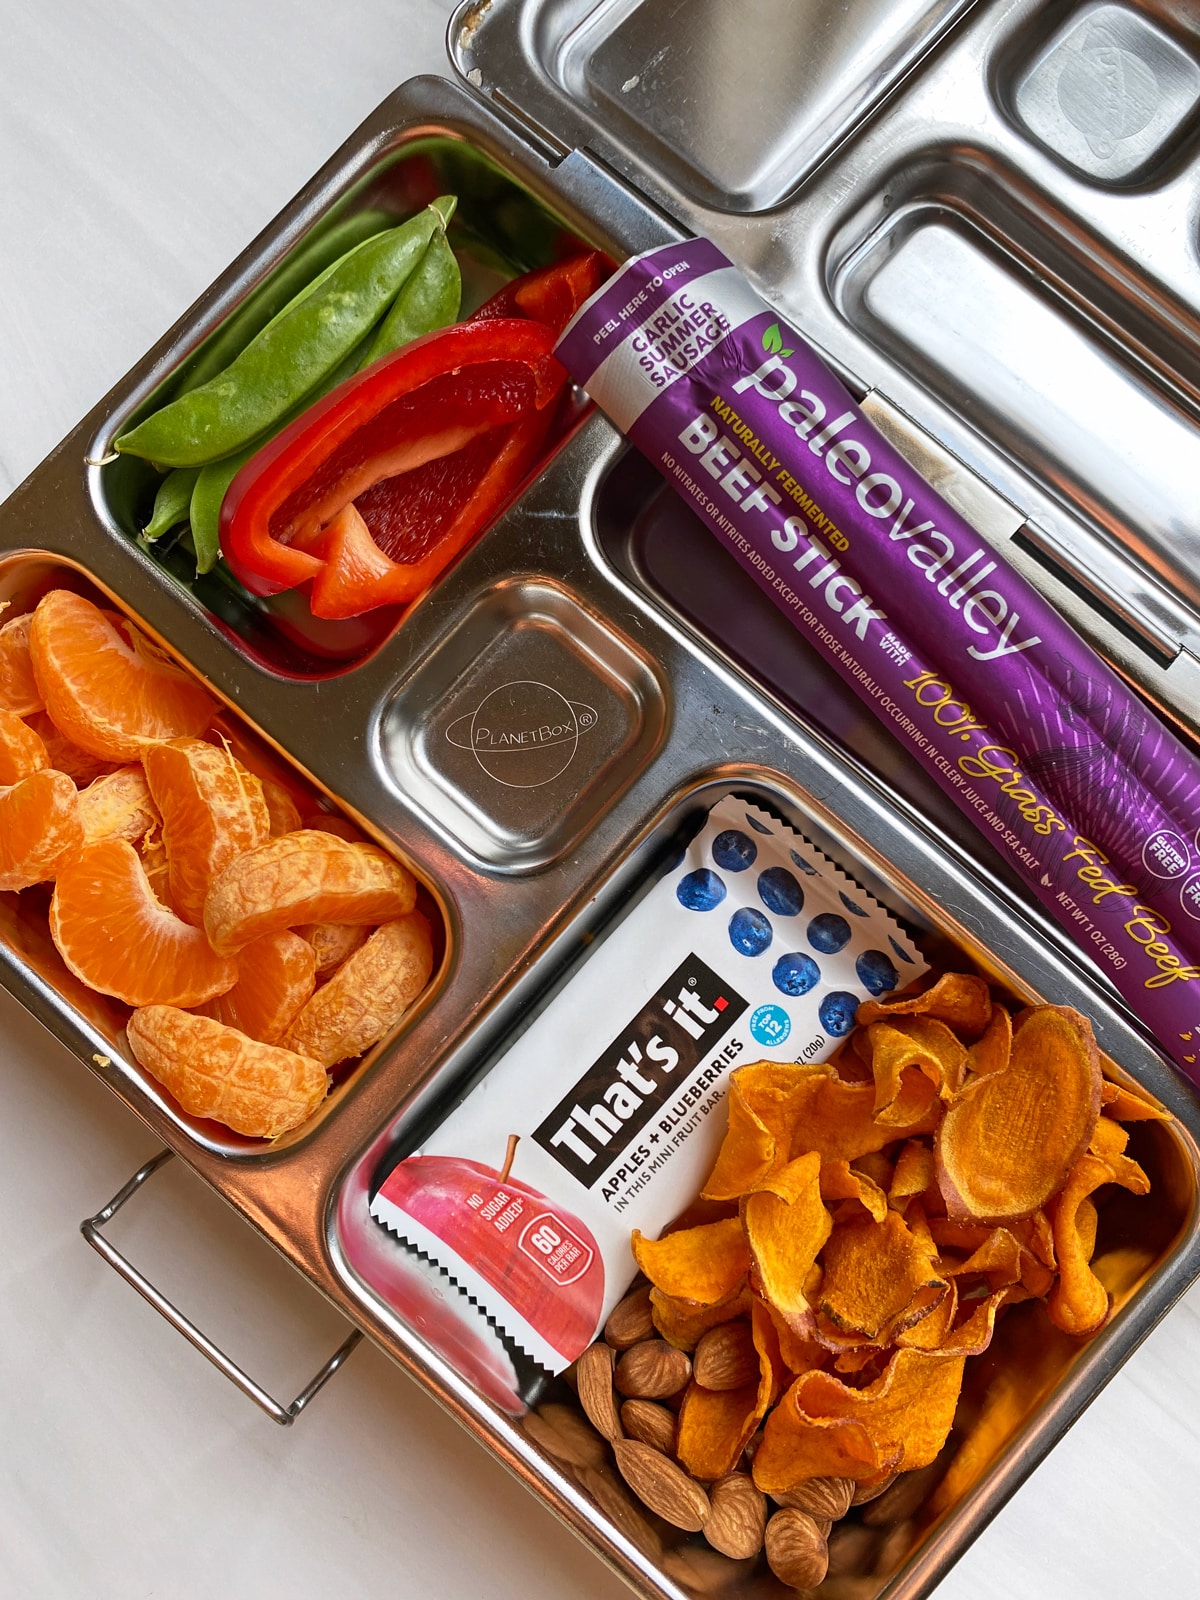 9 Amazing Meal Prep Lunch Box for 2023